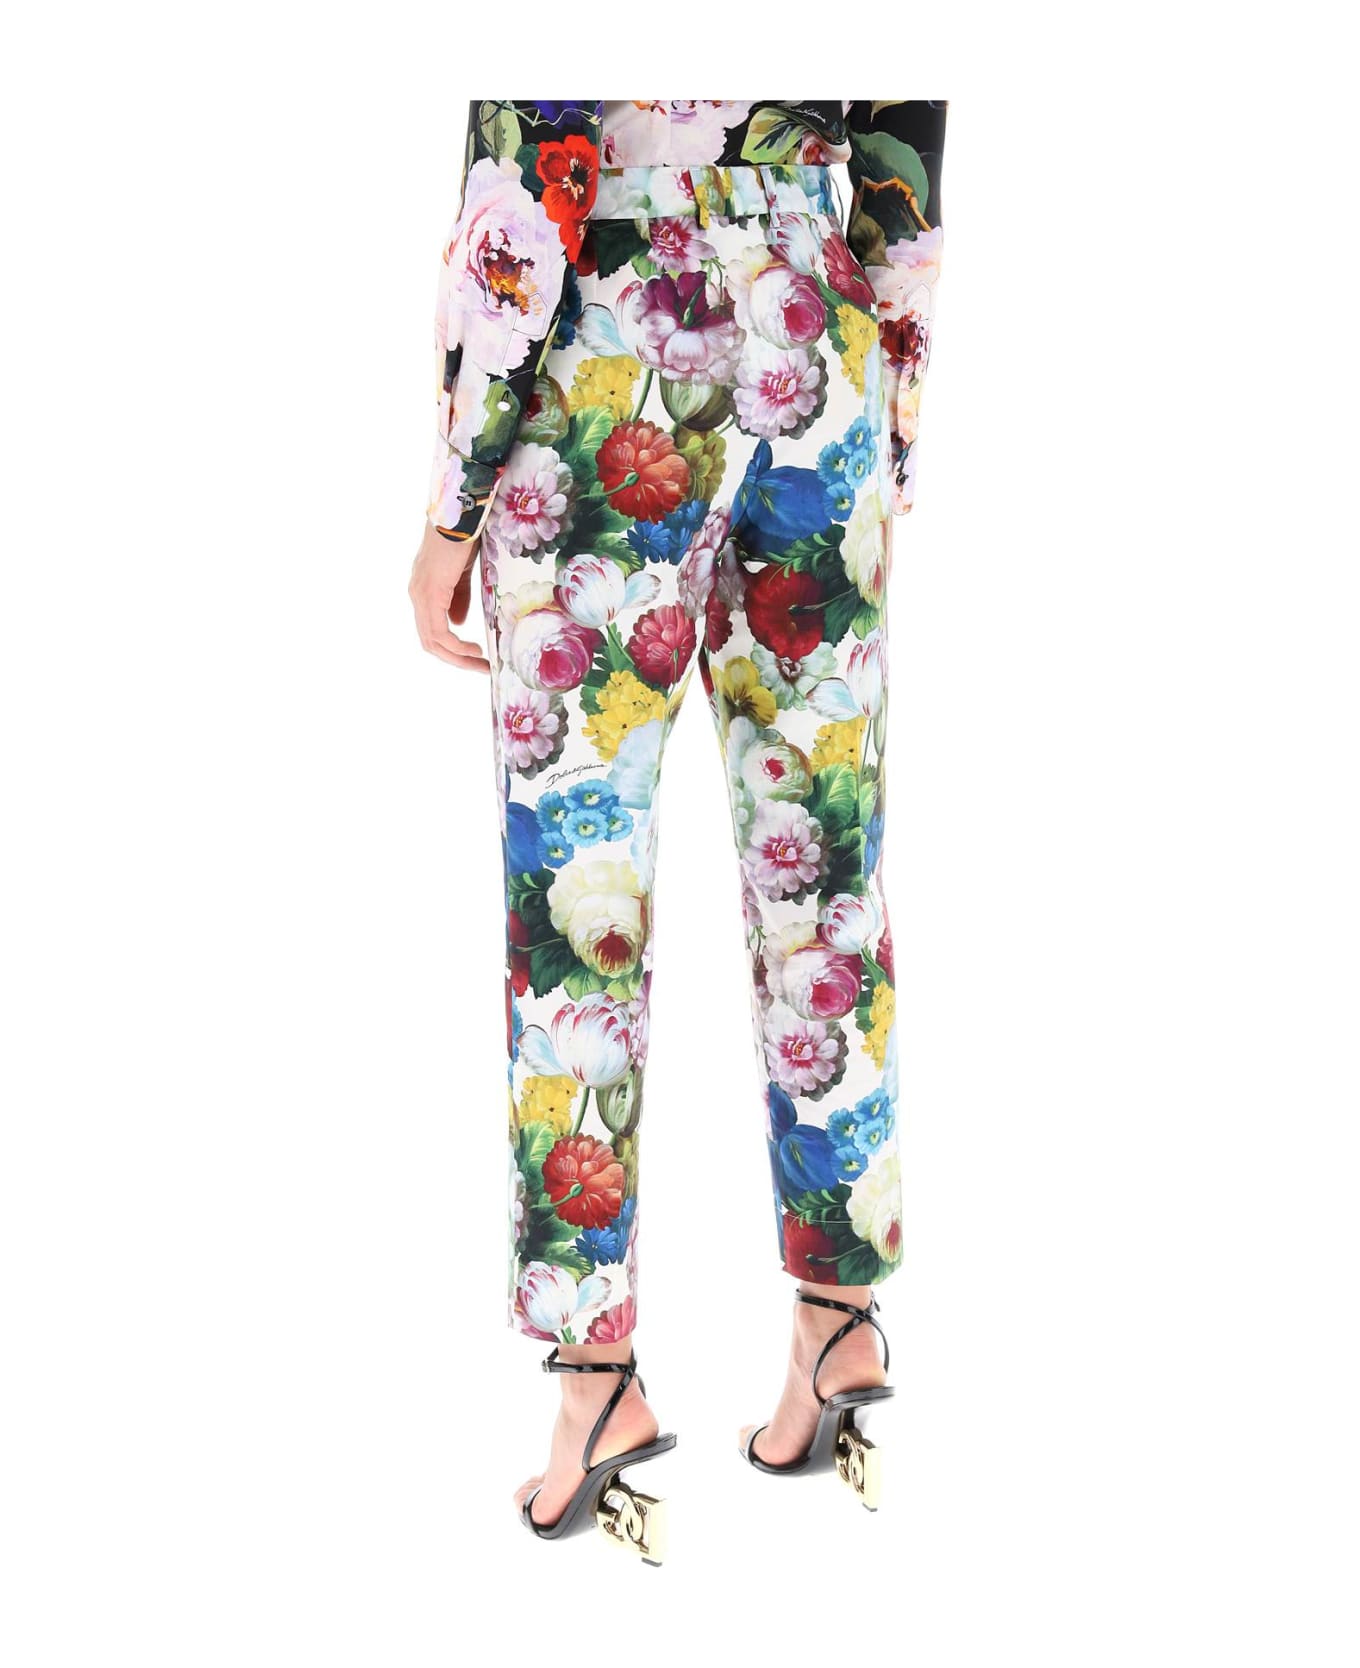 Dolce & Gabbana Nocturnal Flower Cigarette Pants - FIORE NOTTURNO F BCO ボトムス